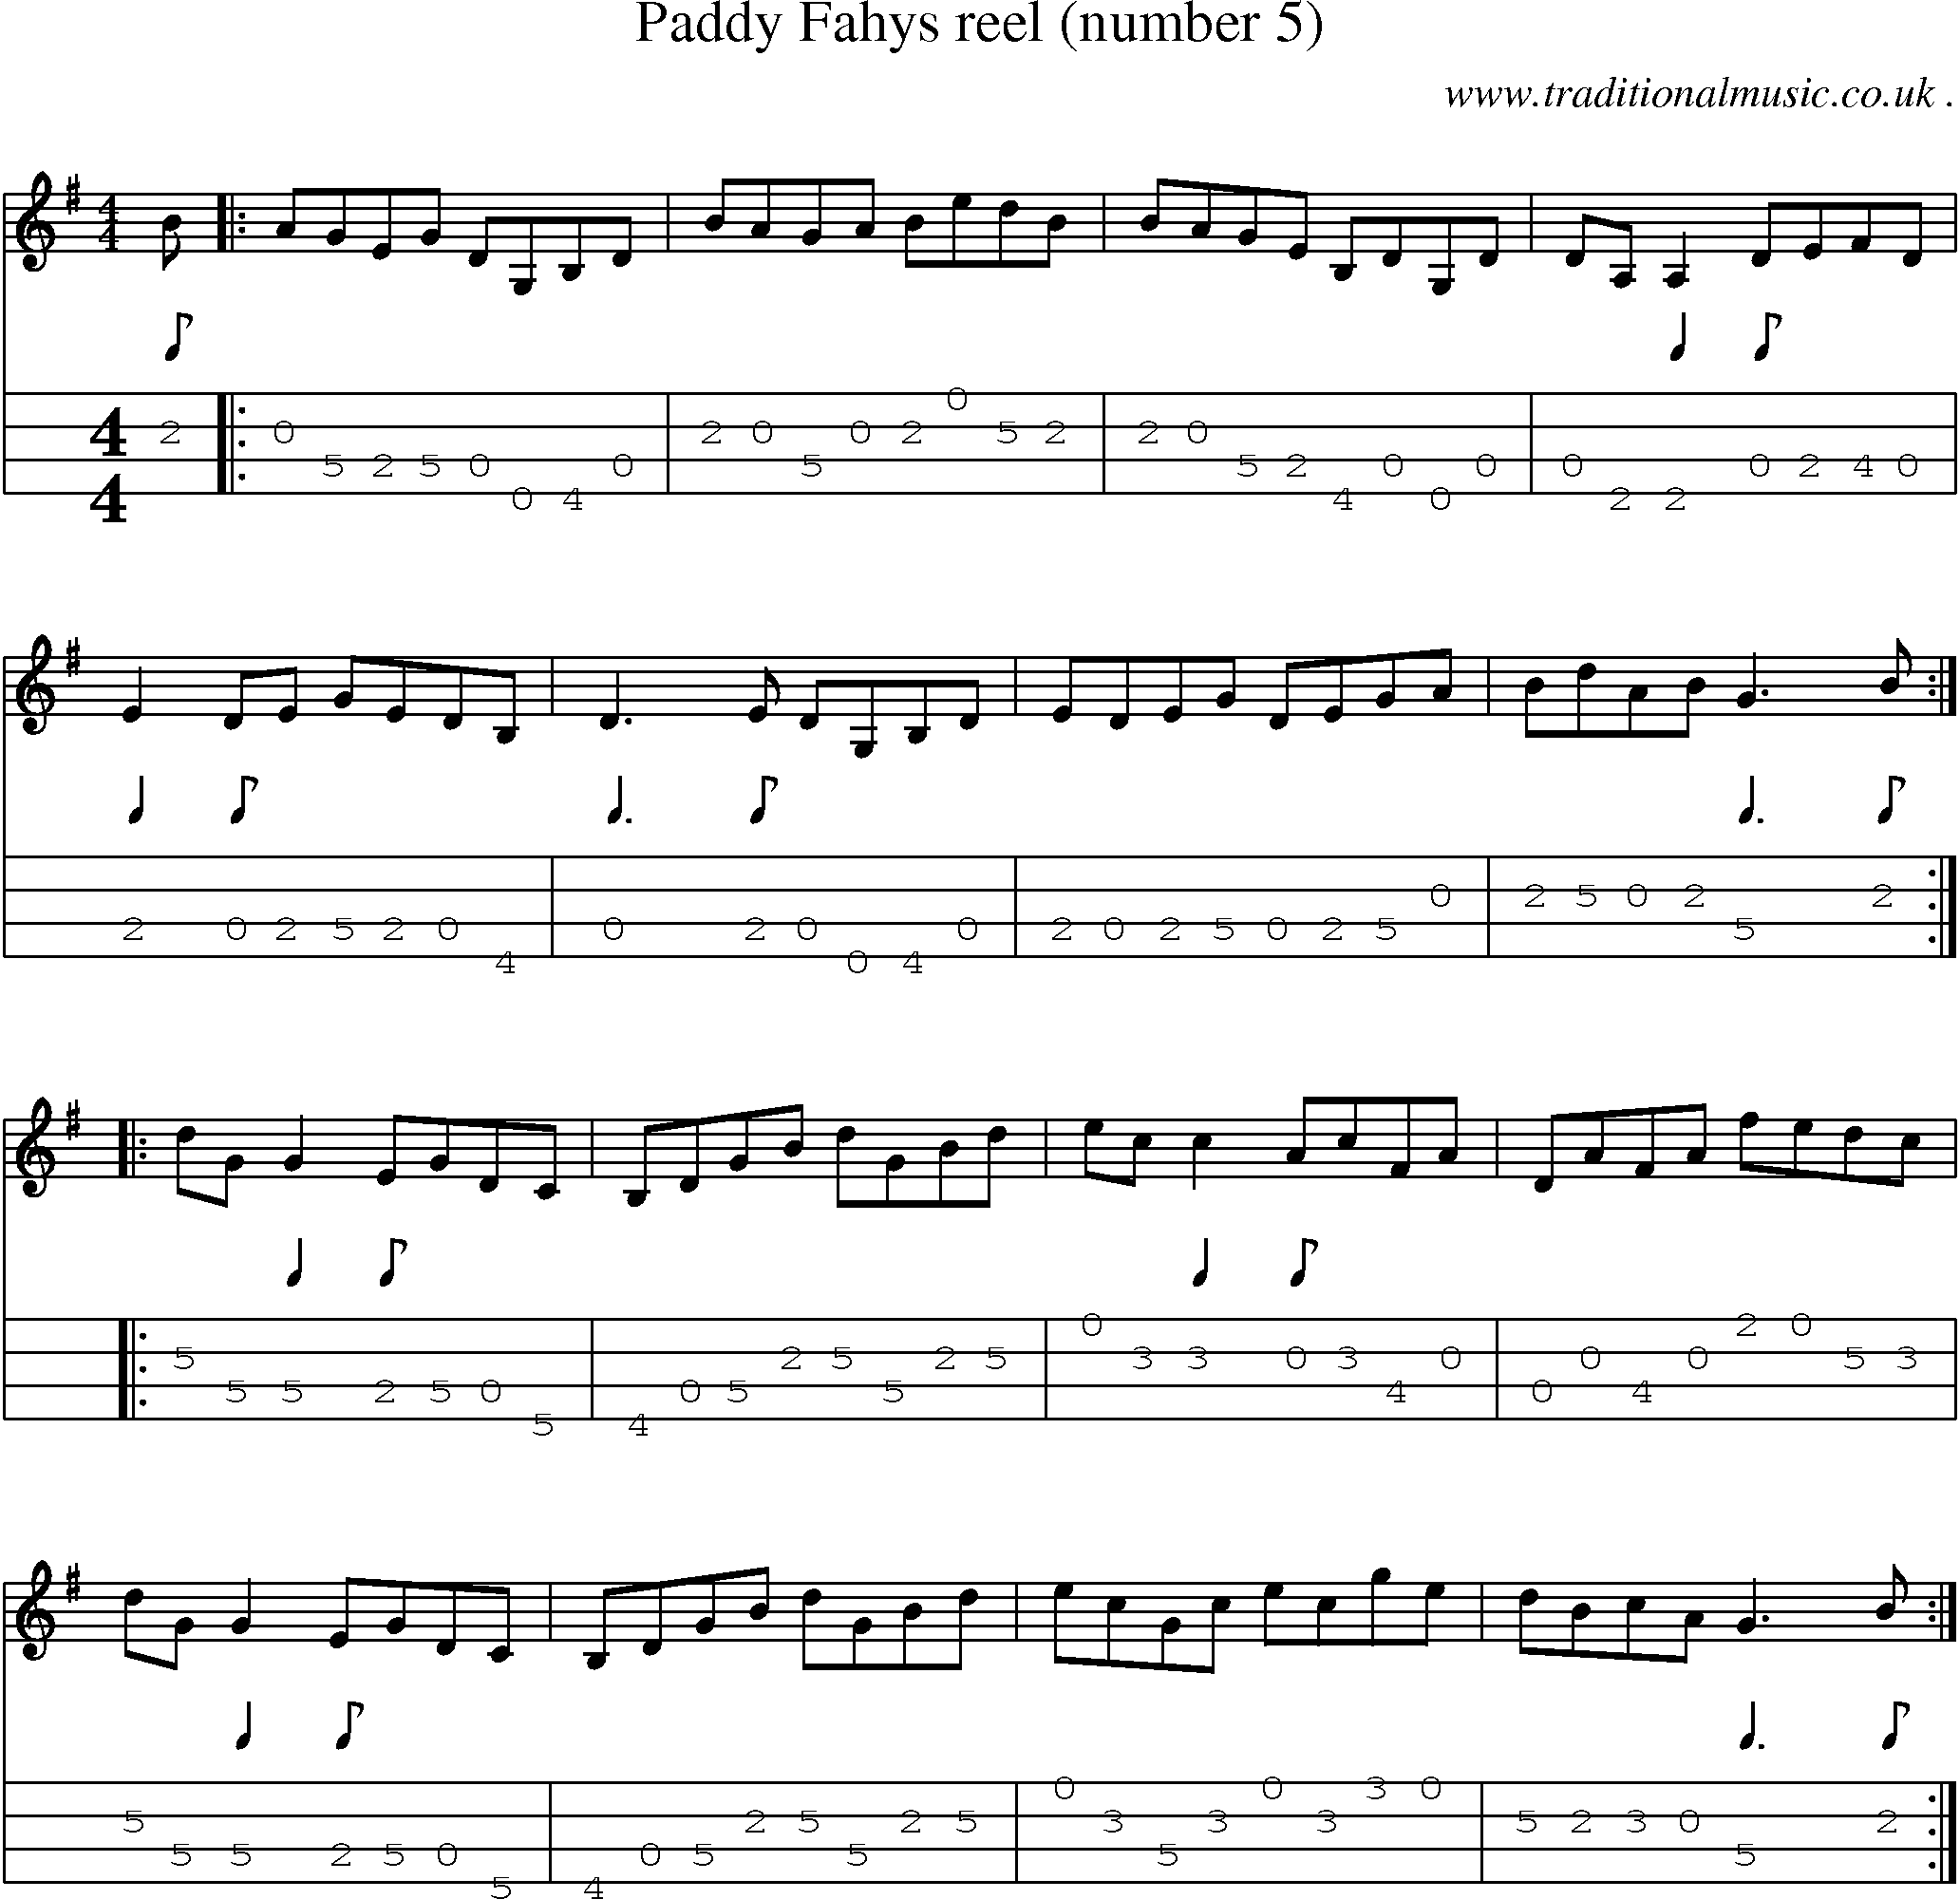 Sheet-Music and Mandolin Tabs for Paddy Fahys Reel (number 5)